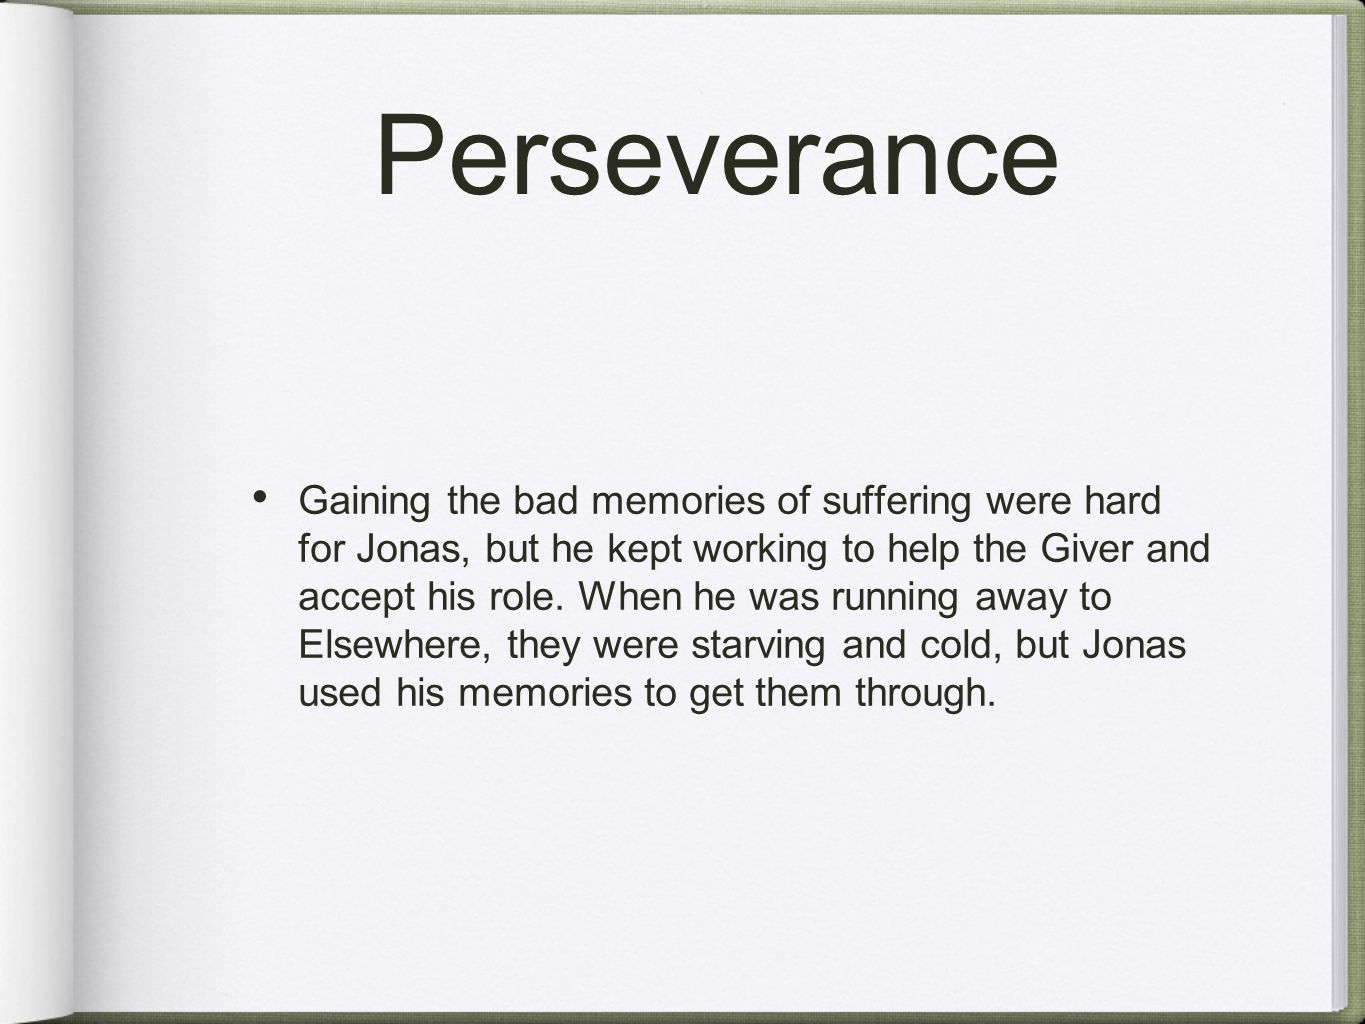 Perseverance Gaining the bad memories of suffering were hard for Jonas, but he kept working to help the Giver and accept his role.